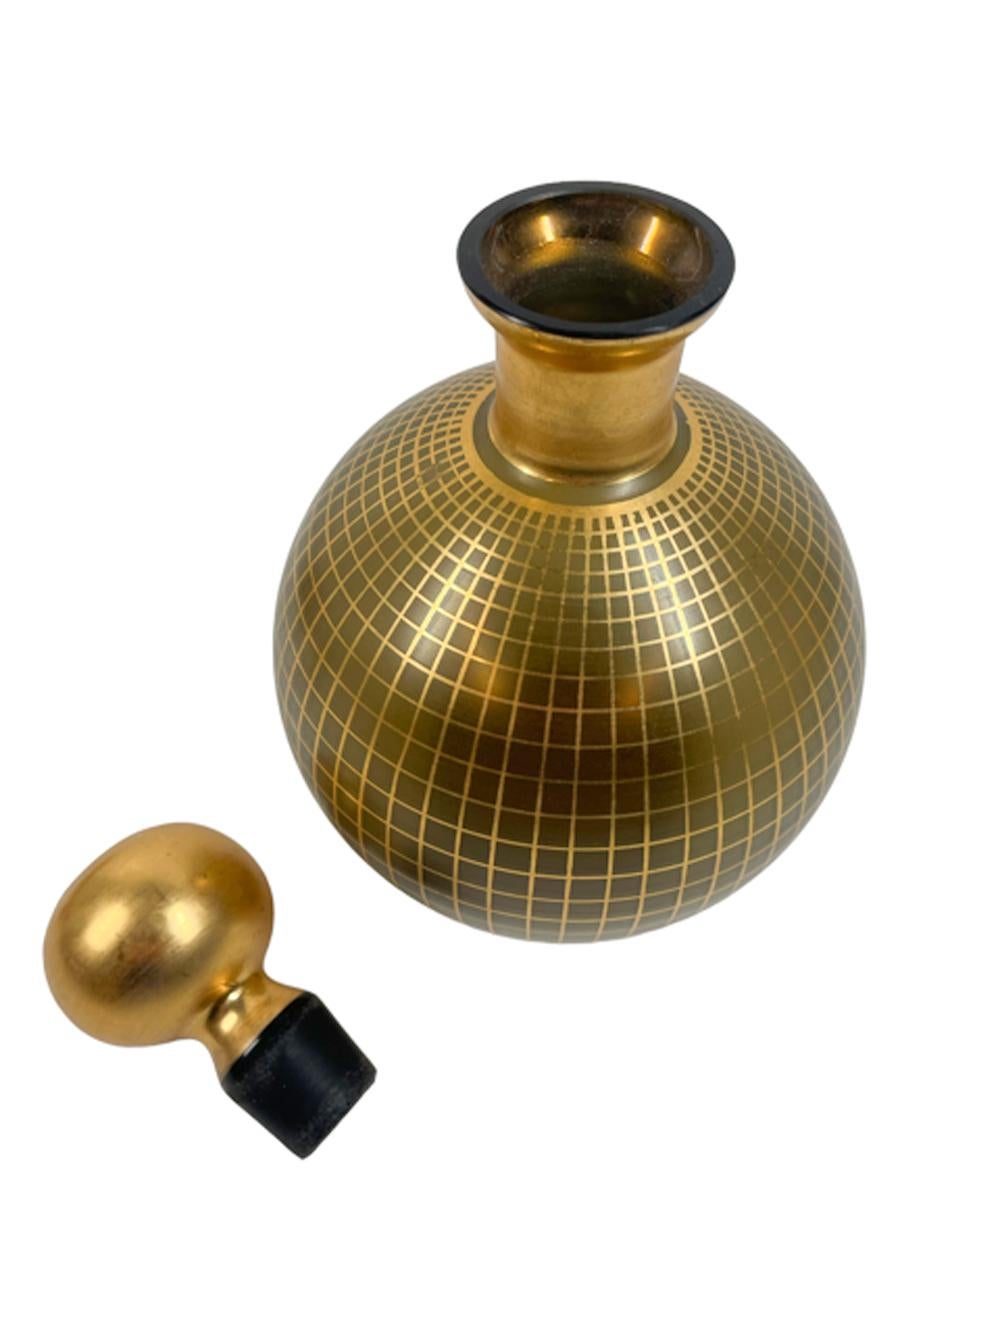 Art Deco decanter set - spherical decanter and six snifter shaped glasses in pale brown amber glass with a gold grid decoration on the decanter body and bowls of the glasses, the decanter neck, stopper and foot of the glasses are completely gilded.